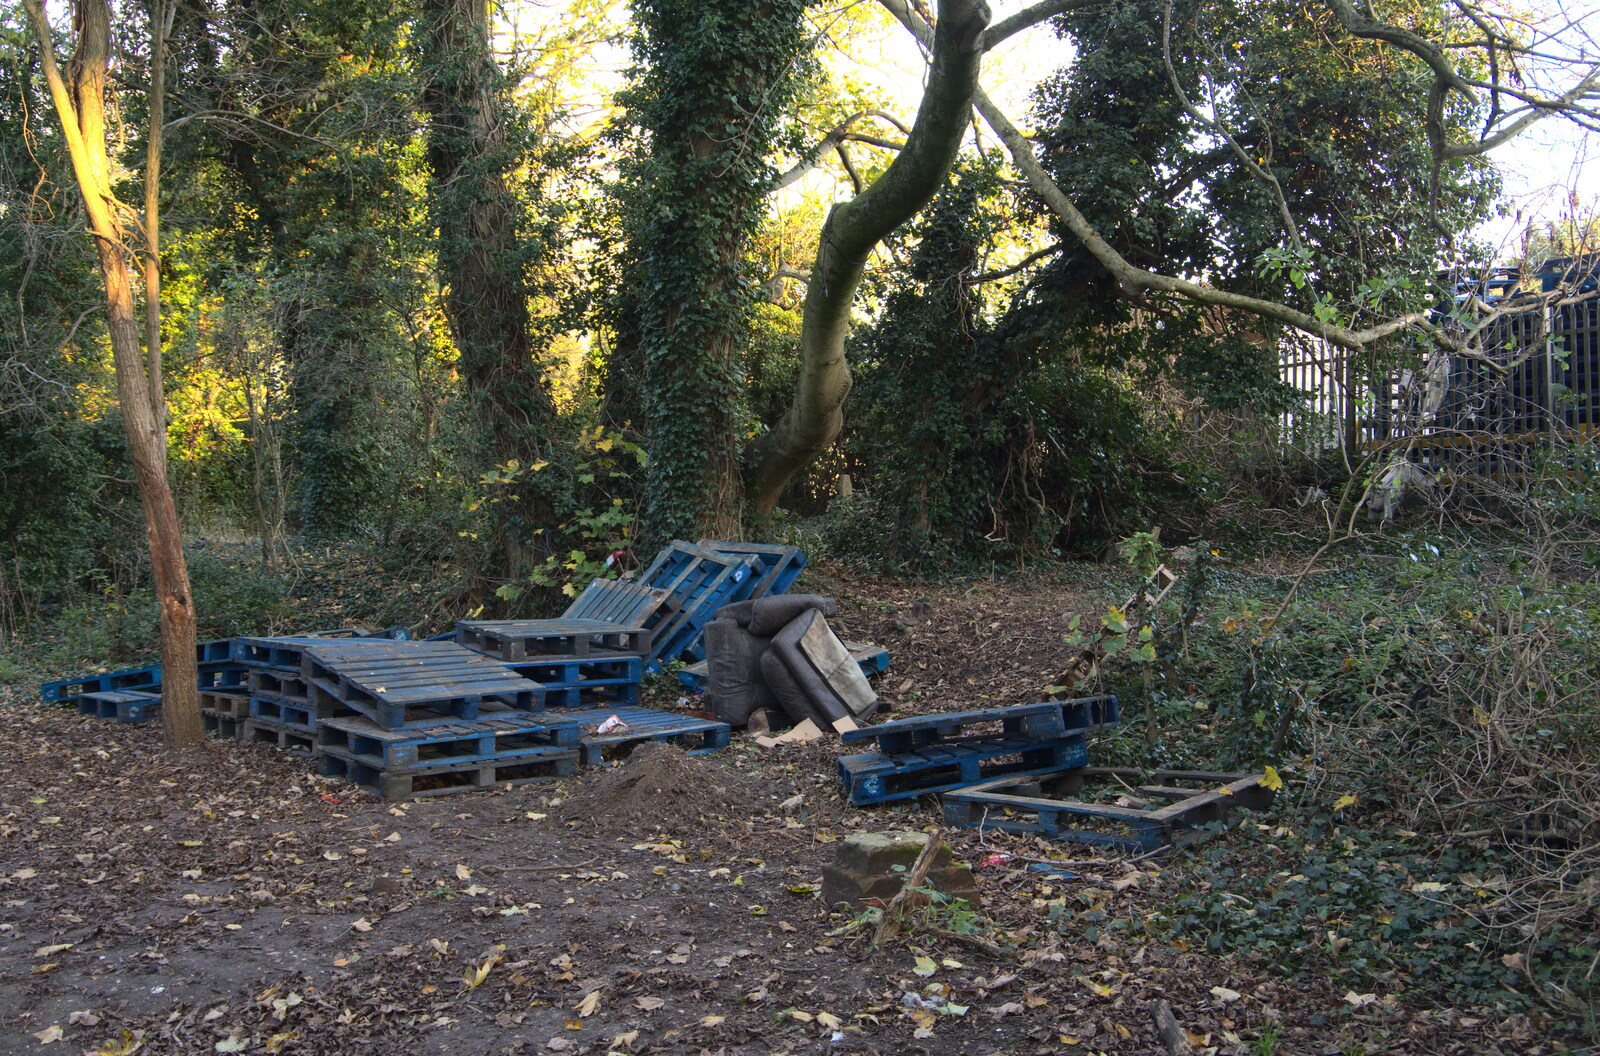 The pile o' pallets from The Dereliction of Eye, Suffolk - 22nd November 2020